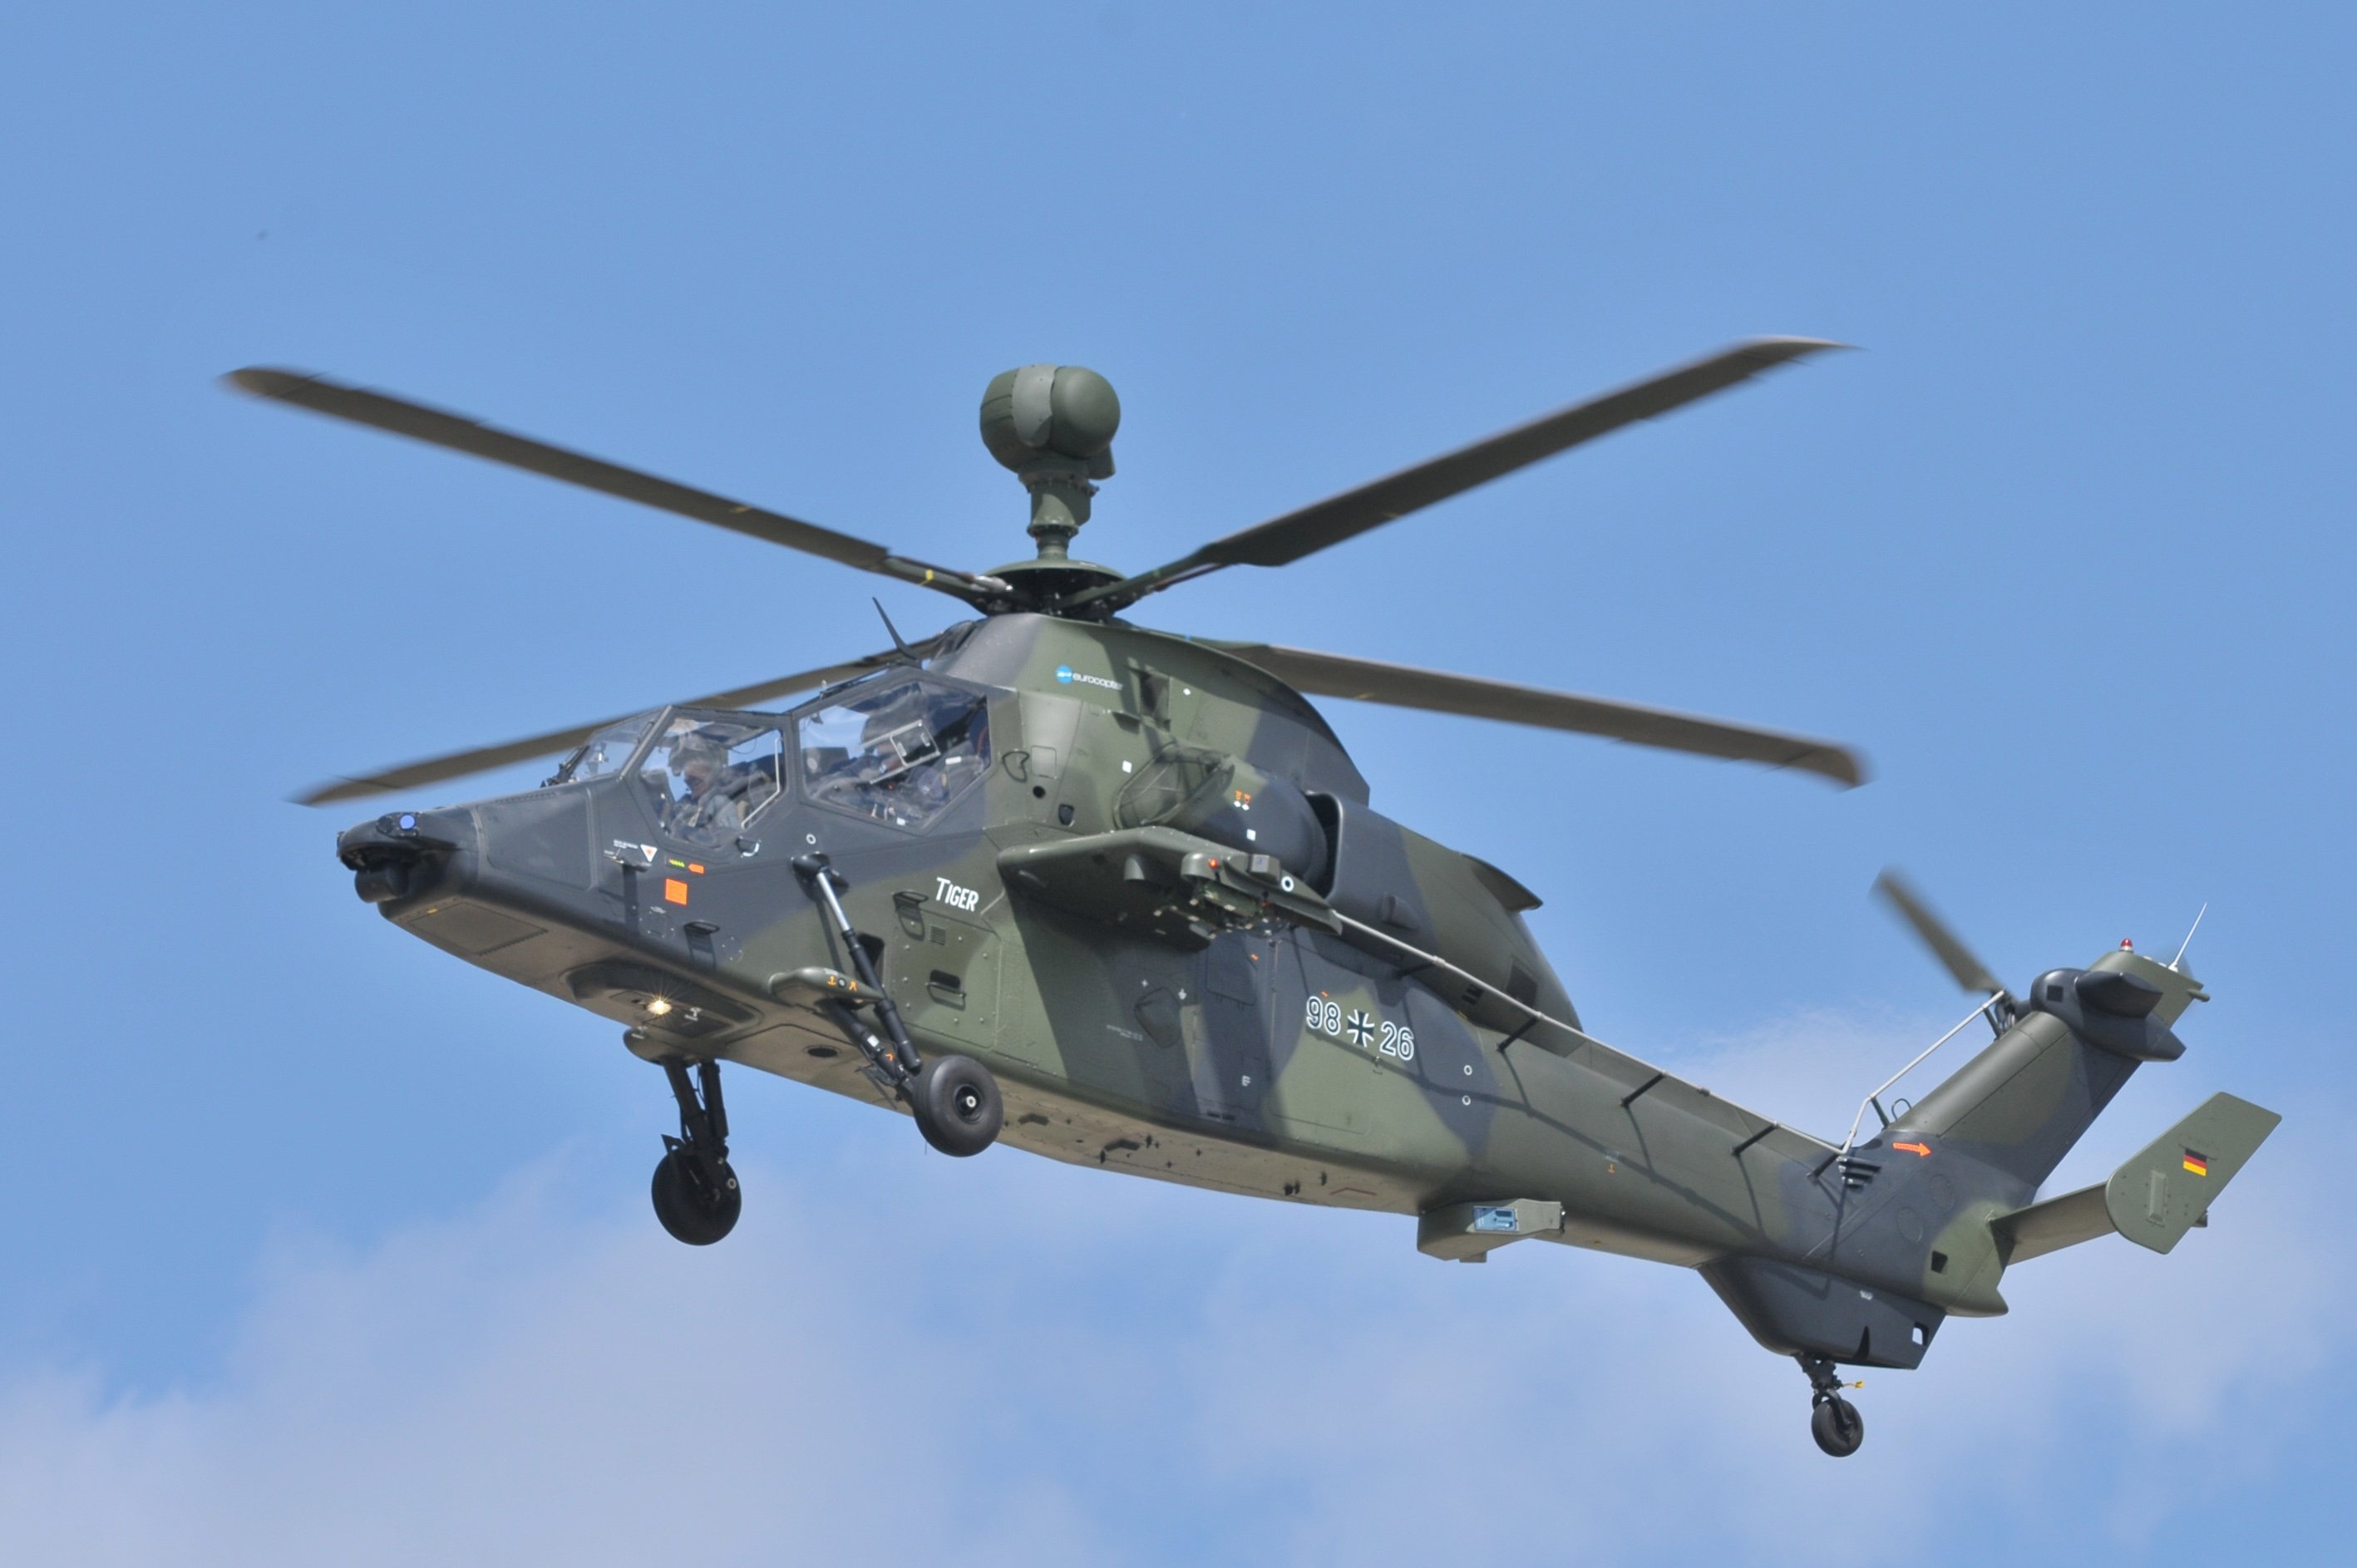 EUROCOPTER TIGER attack helicopter aircraft 11 wallpaper | | 344775 2840x1890